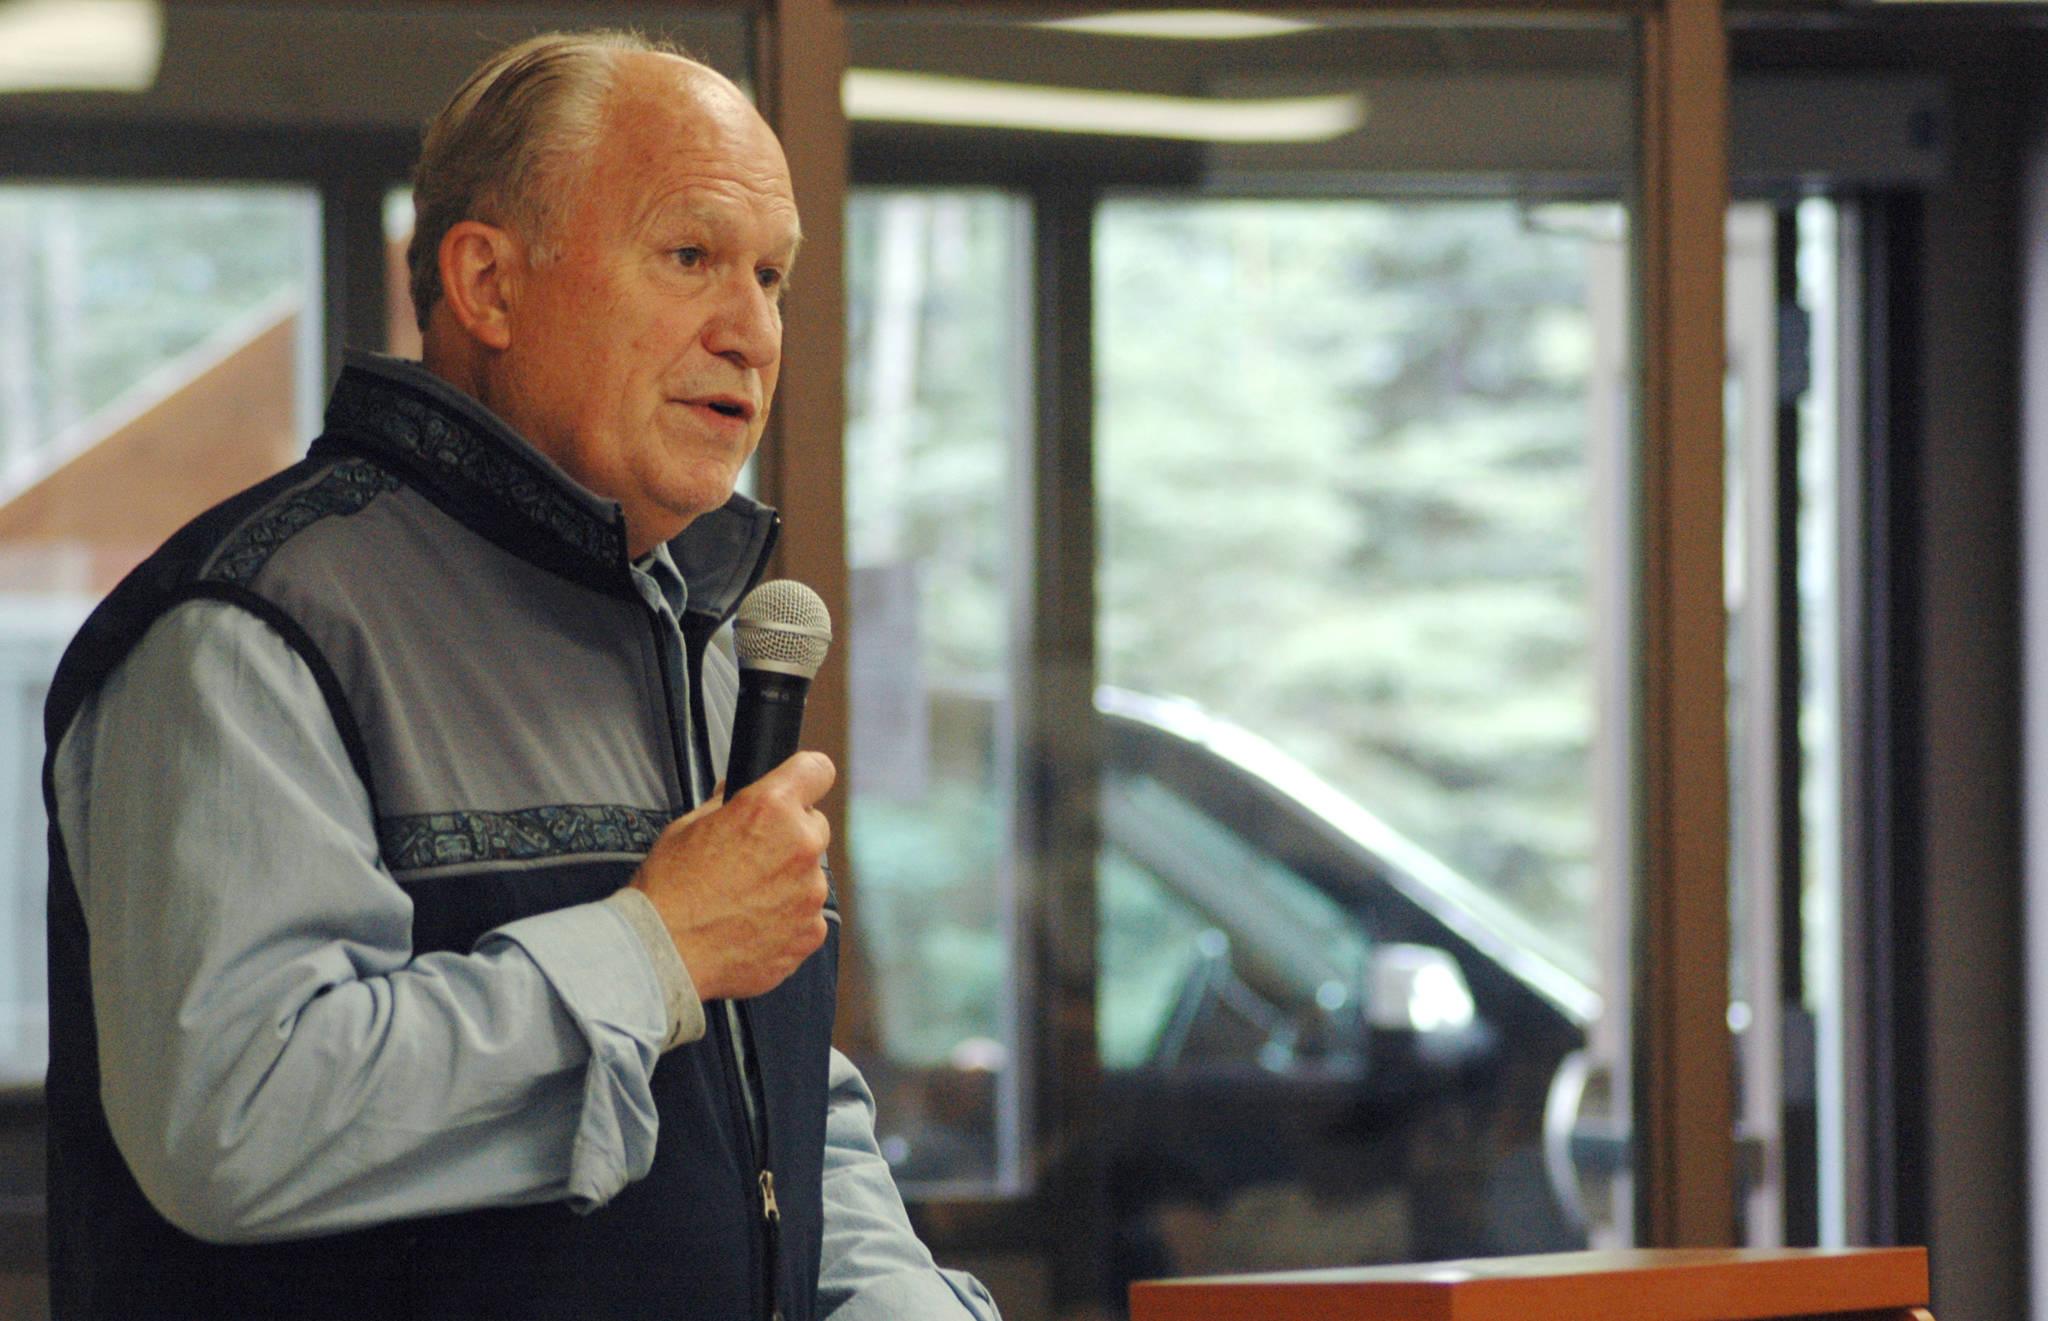 Gov. Bill Walker speaks to a crowd gathered at Hope Community Resources’ building on Kalifornsky Beach Road during a signing ceremony for Senate Bill 174 on Saturday, Aug. 25, 2018 in Soldotna, Alaska. (Photo by Elizabeth Earl/Peninsula Clarion)